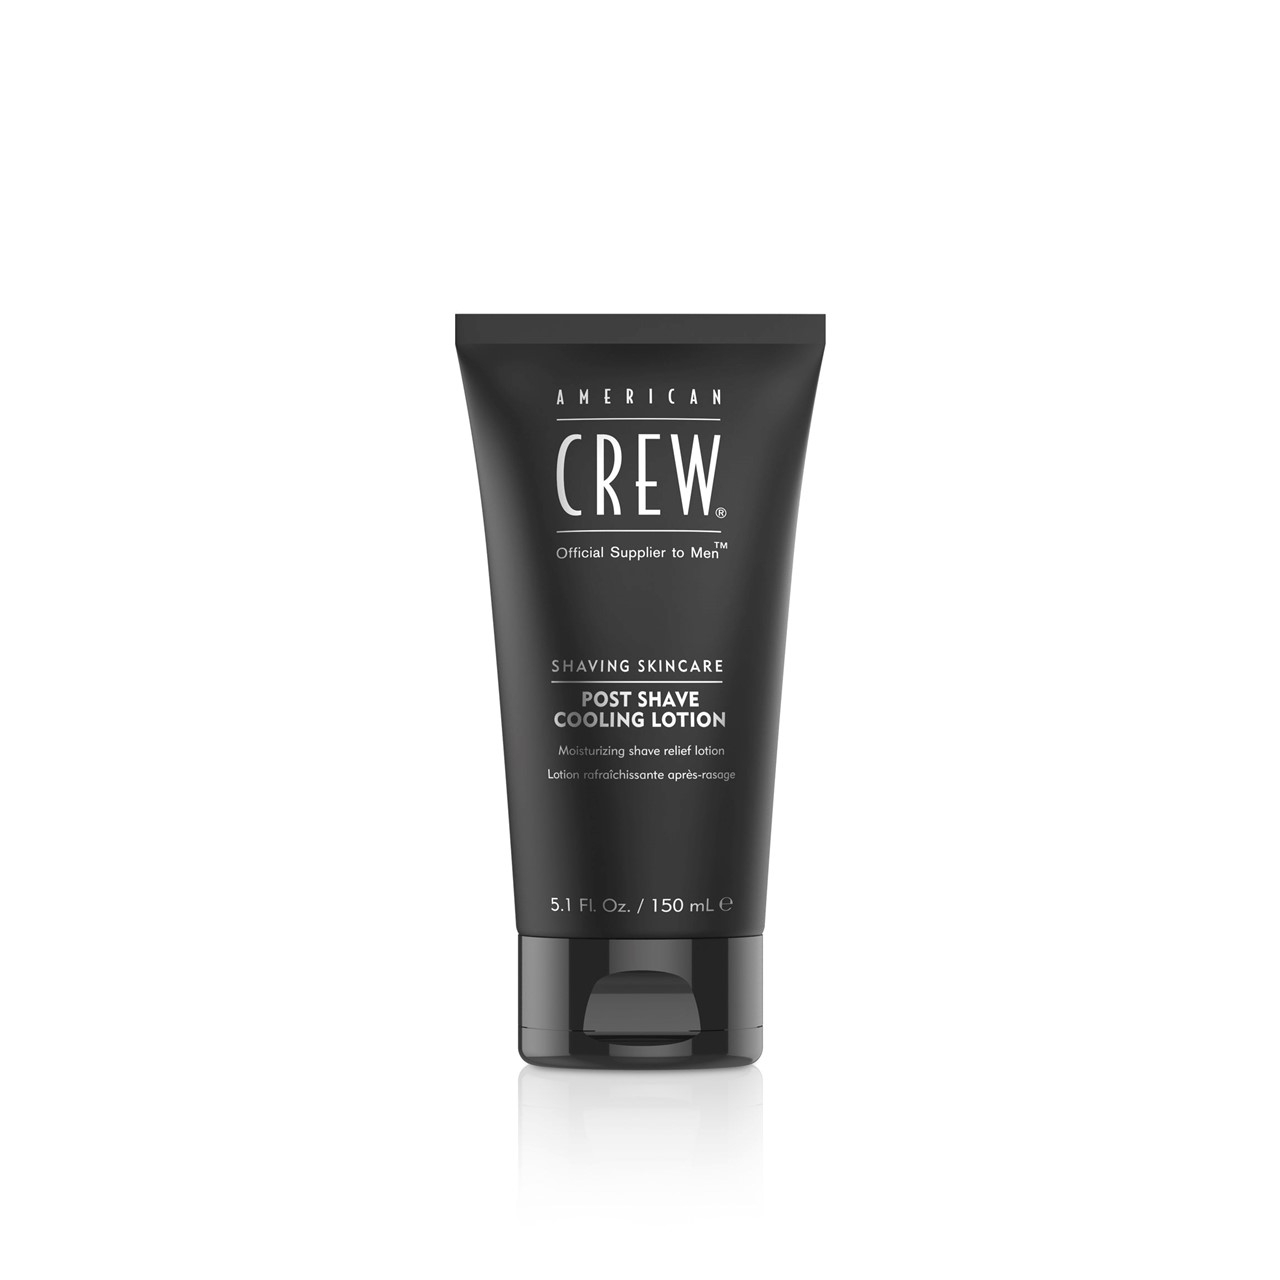 American Crew Post Shave Cooling Lotion 150ml (5.07fl oz)